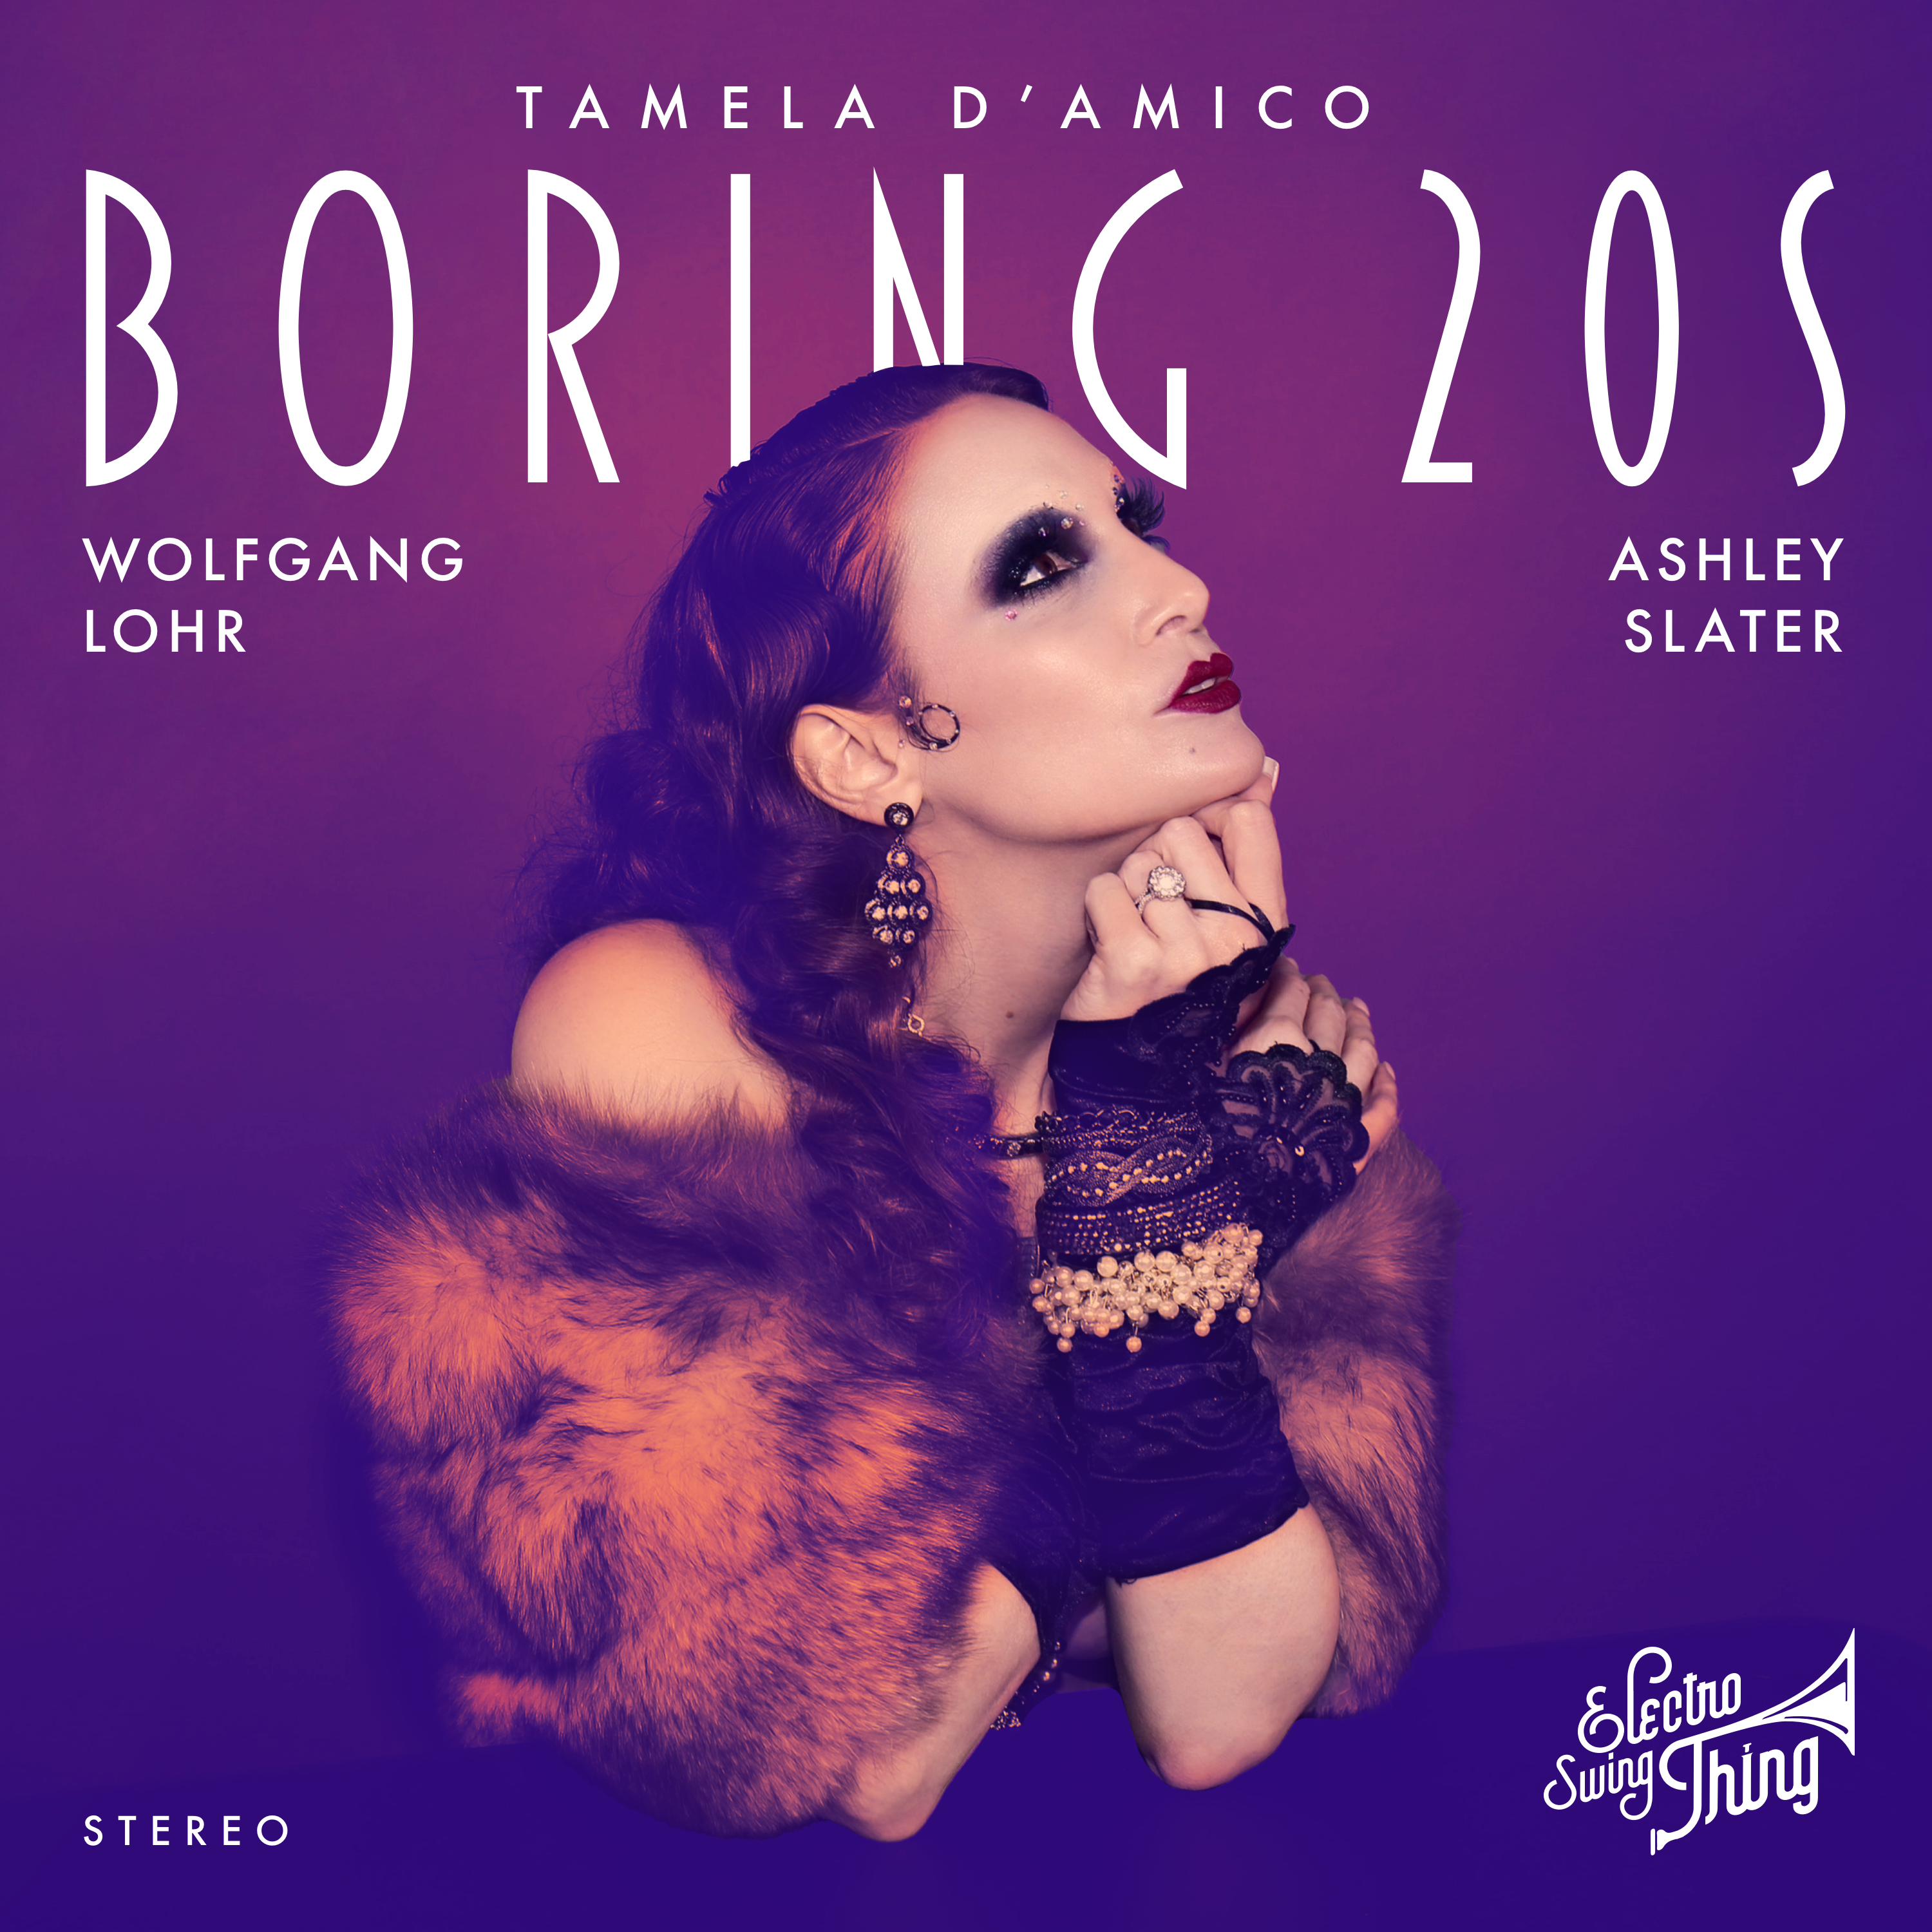 ‘Tamela D’Amico’ teams up with Electro Swing producer ‘Wolfgang Lohr’ and songwriter ‘Ashley Slater’ on new single ‘Boring 20s’.